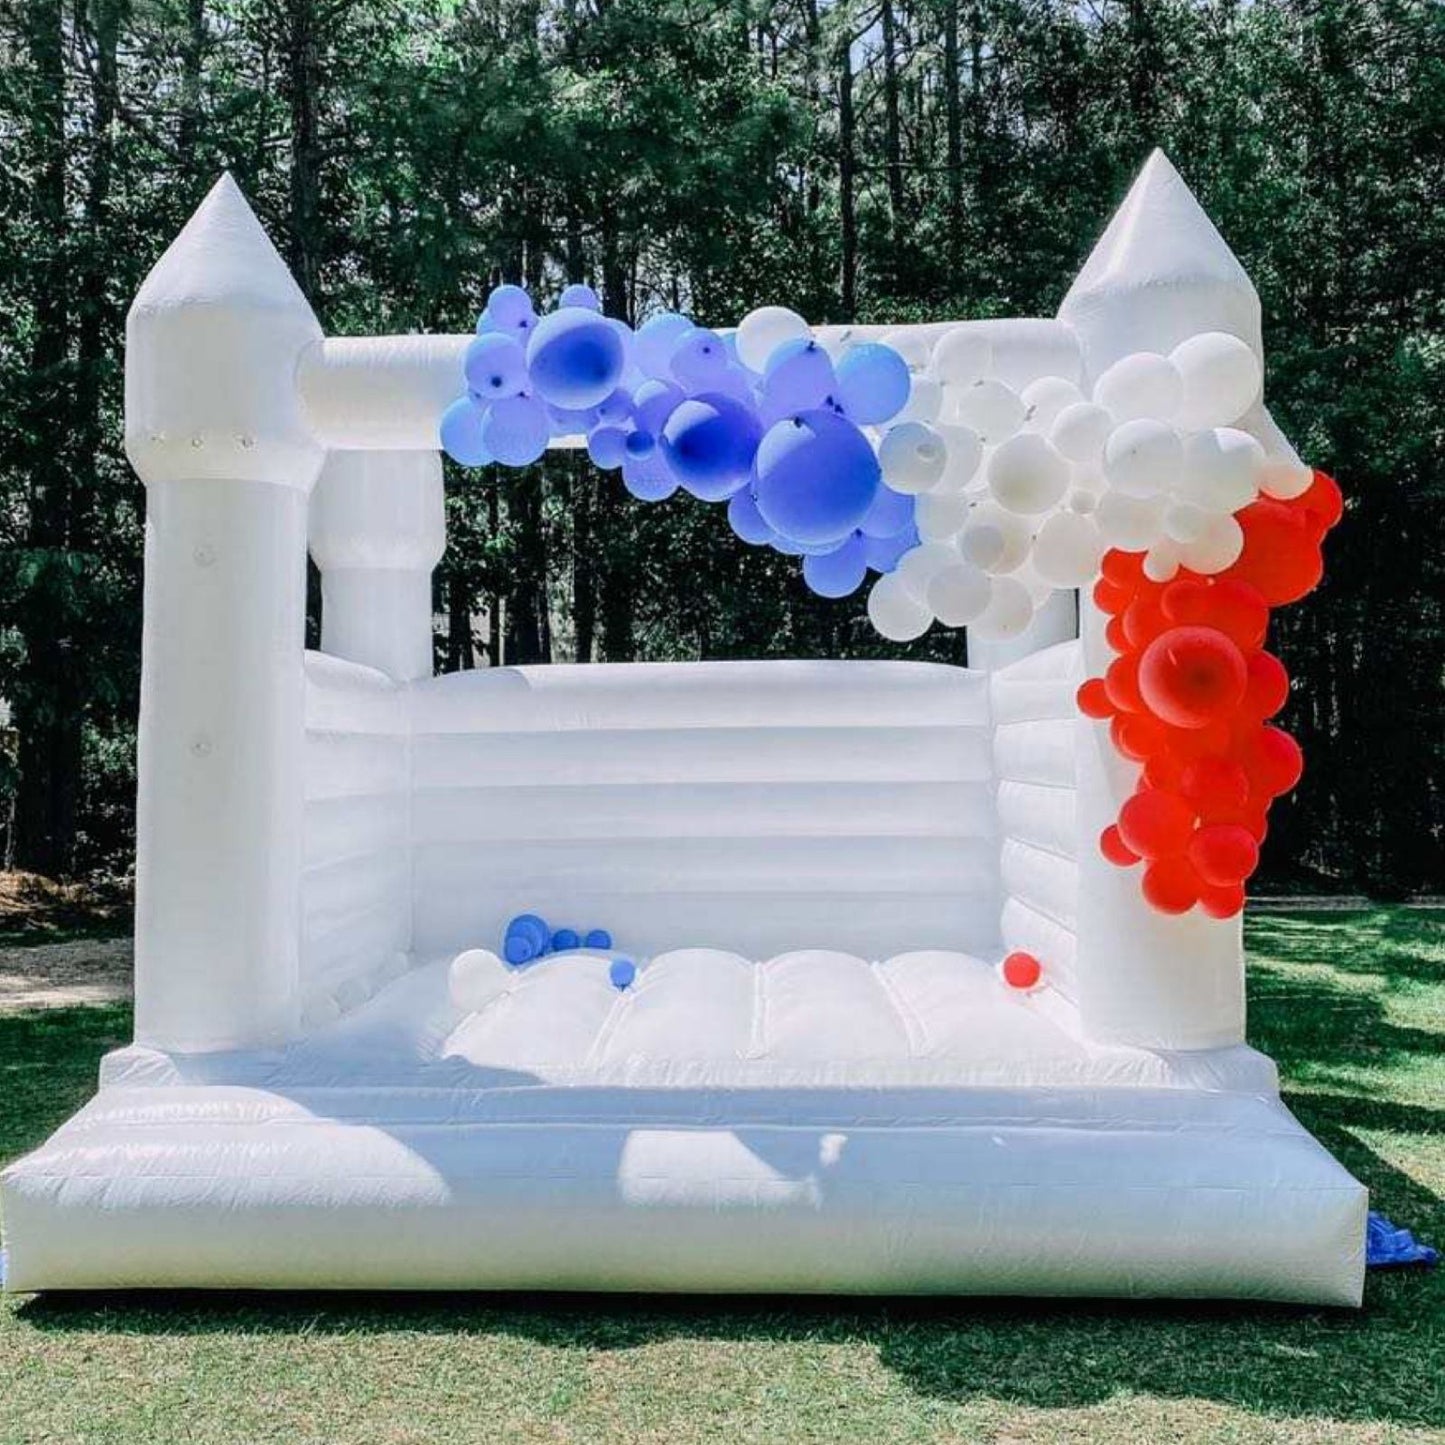 Inflatable White Bounce House Professional Jumping Bouncy Castle Bouncer for Wedding Party with Air Blower Balloons Carrying Bag Repair kit （2 parcels） (10ft*10ft*8ft（3 * 3 * 2.5 m）)